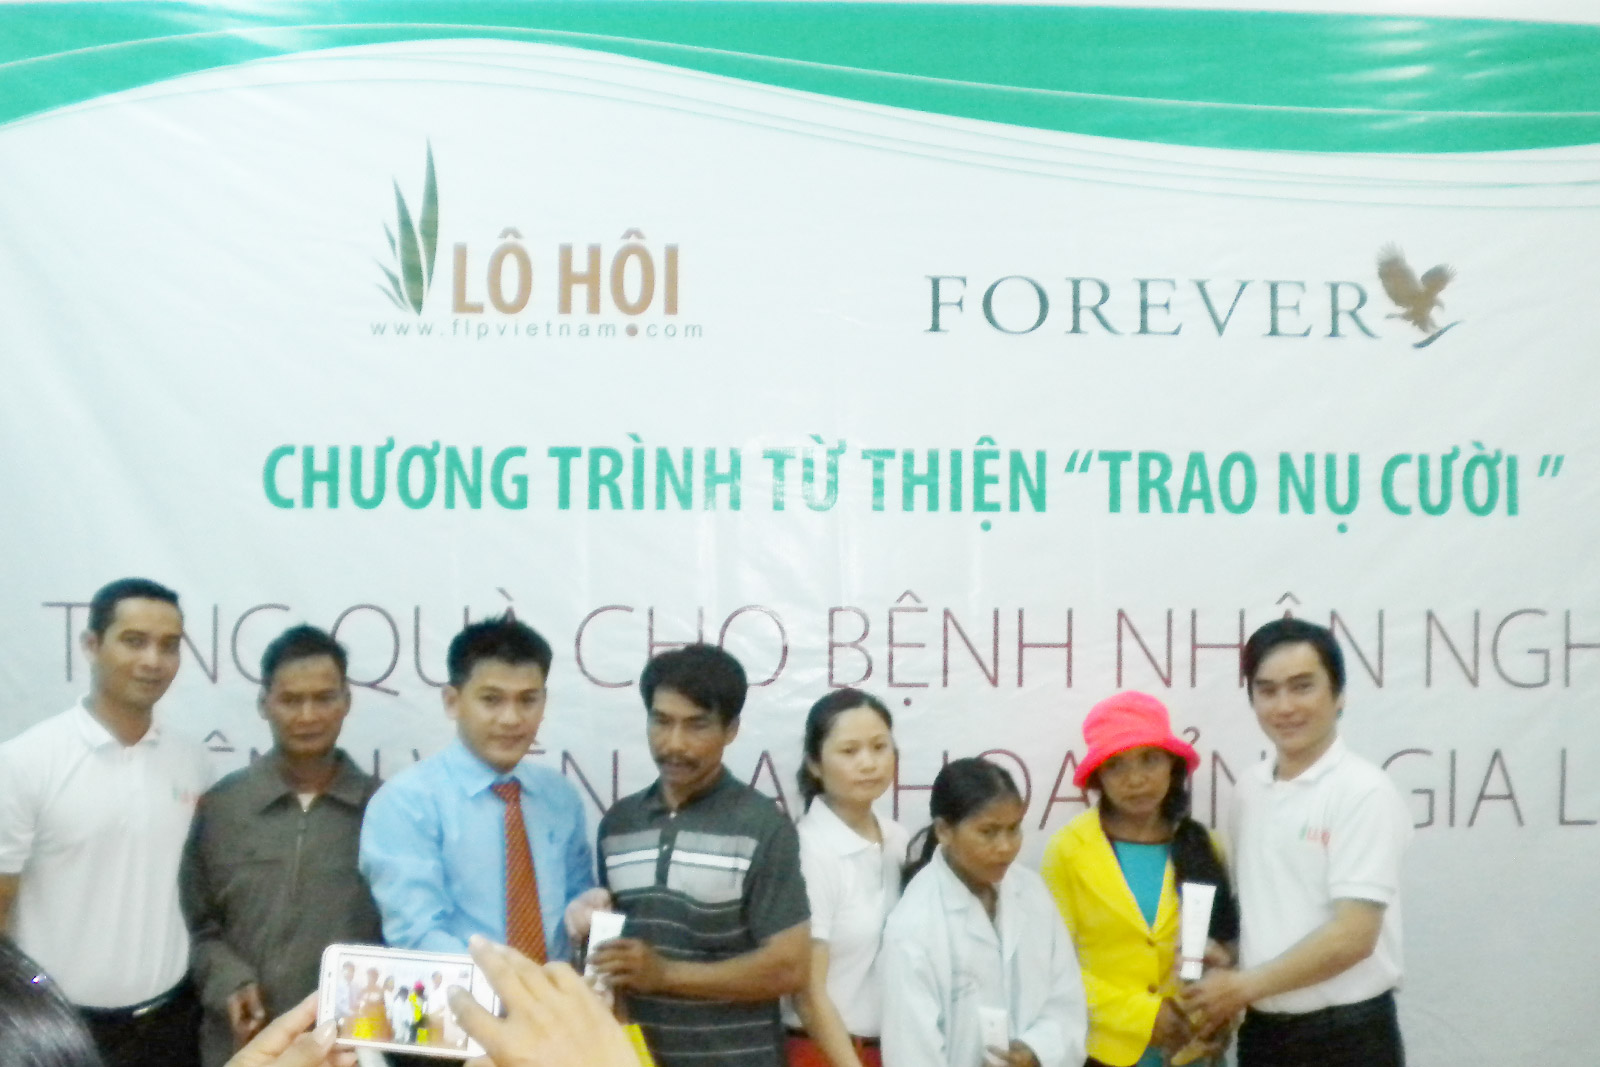 The charitable program “Giving smiles” Gifts for to poor patients at General hospital in Gia Lai